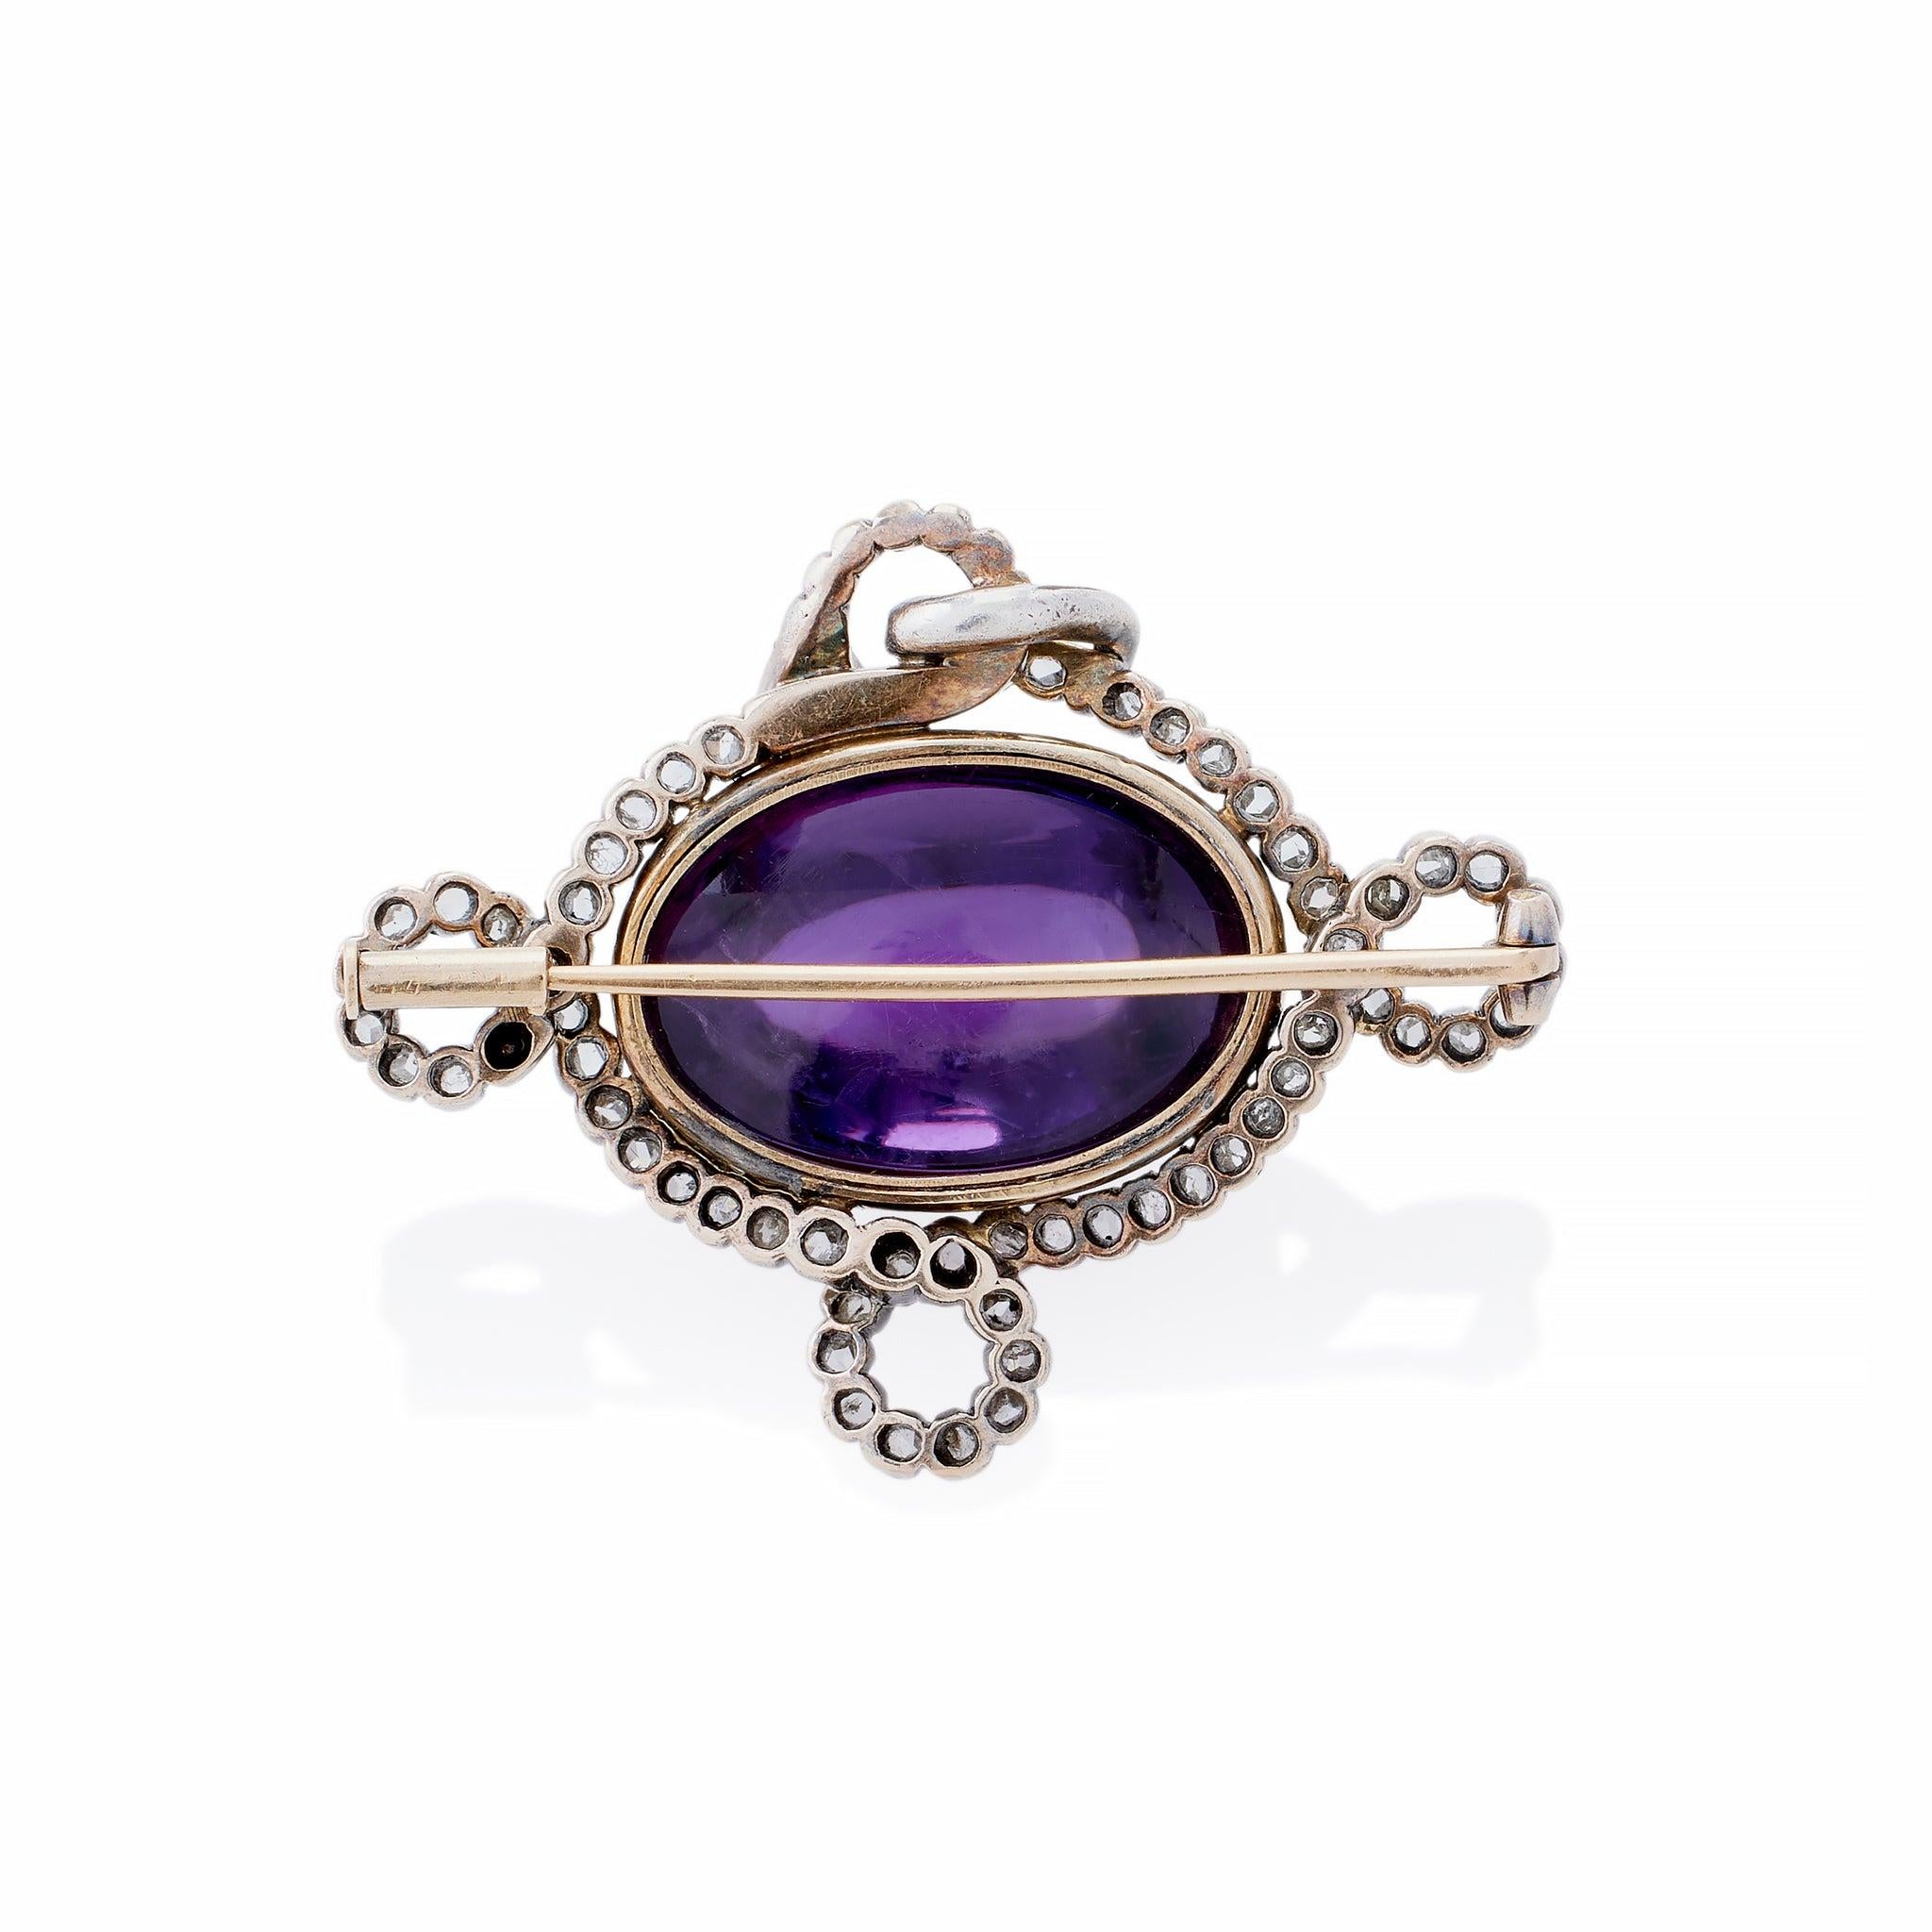 Dating from circa 1880, this serpent brooch is composed of an amethyst cabochon and rose-cut diamonds set in silver and gold. It is designed as an amethyst egg, set in 18K gold, surrounded by a curling silver and rose-cut diamond silver serpent.